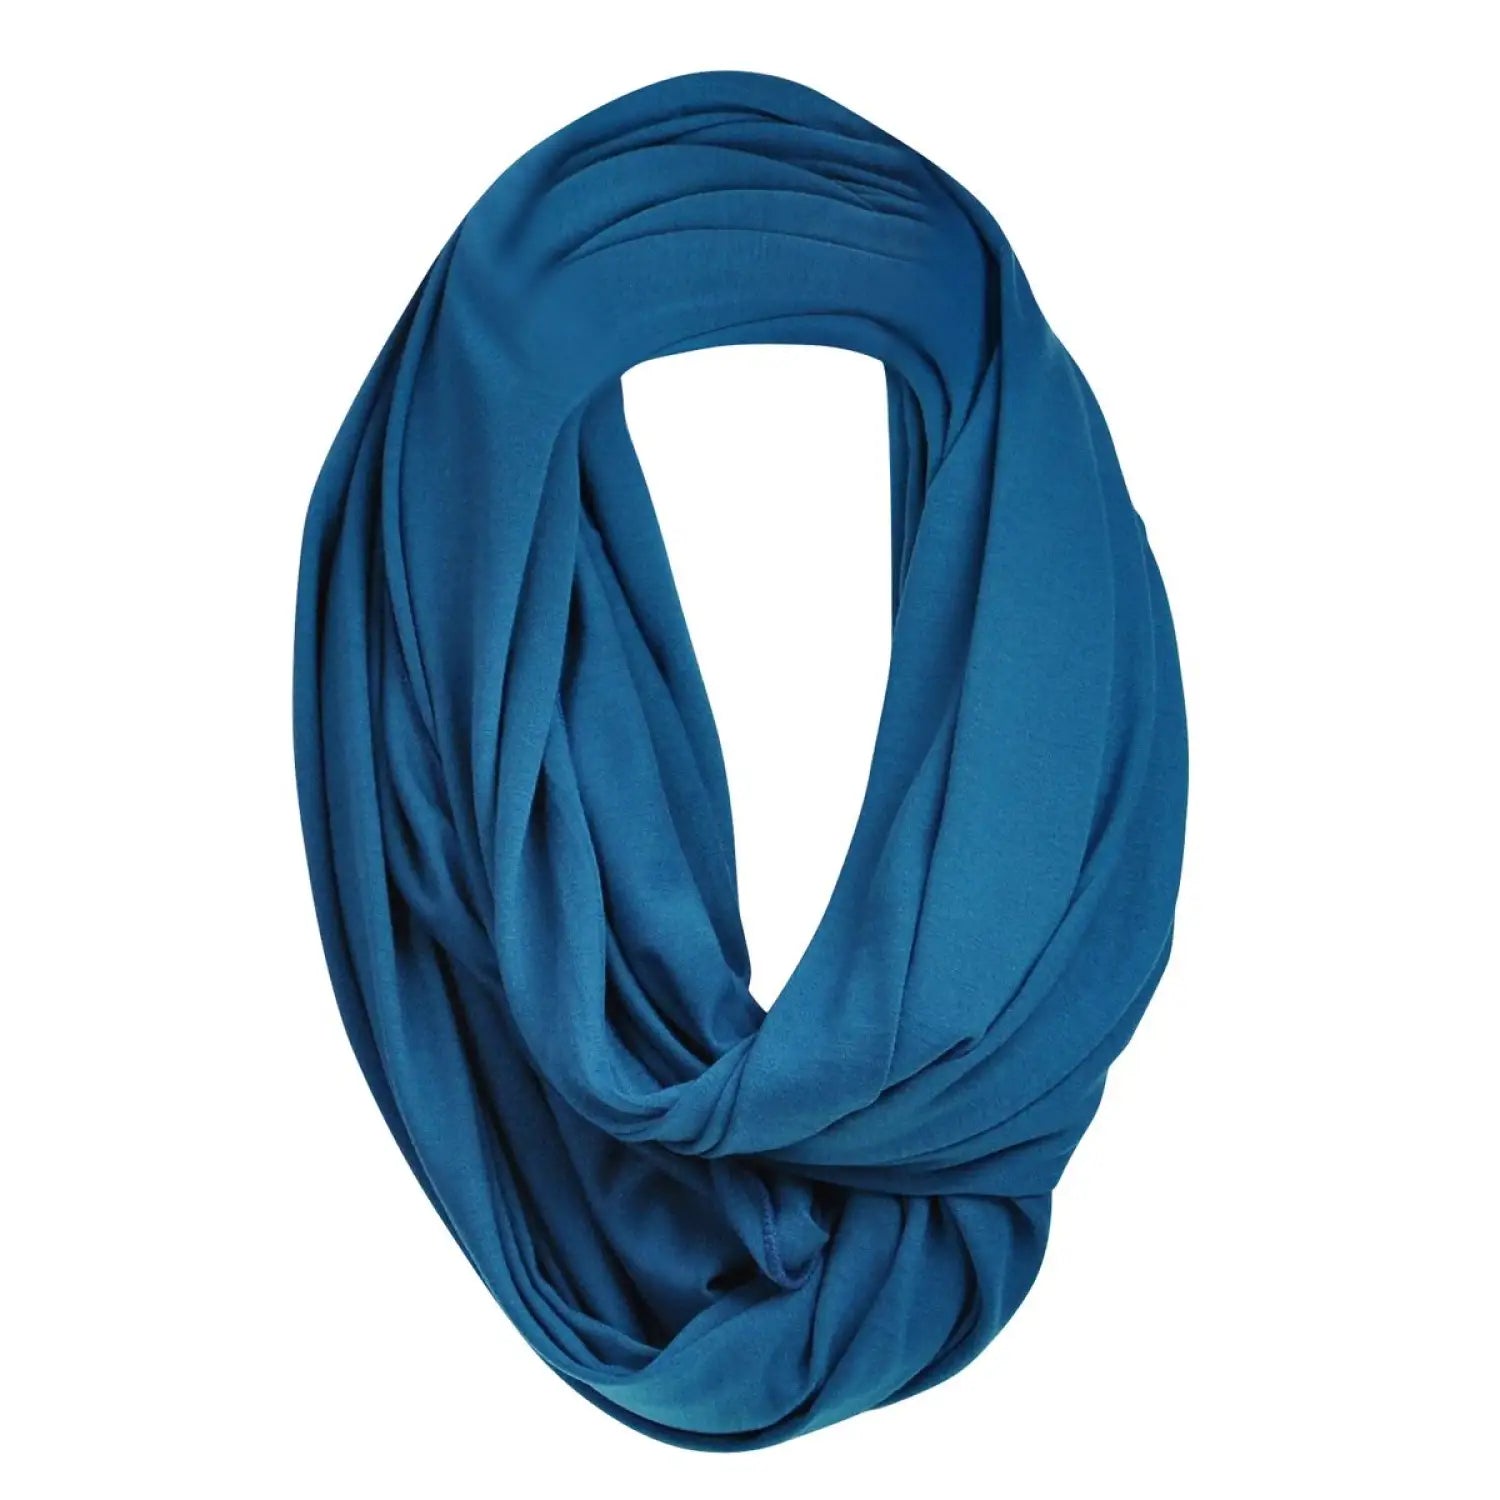 Blue jersey cotton infinity snood with soft and stylish design